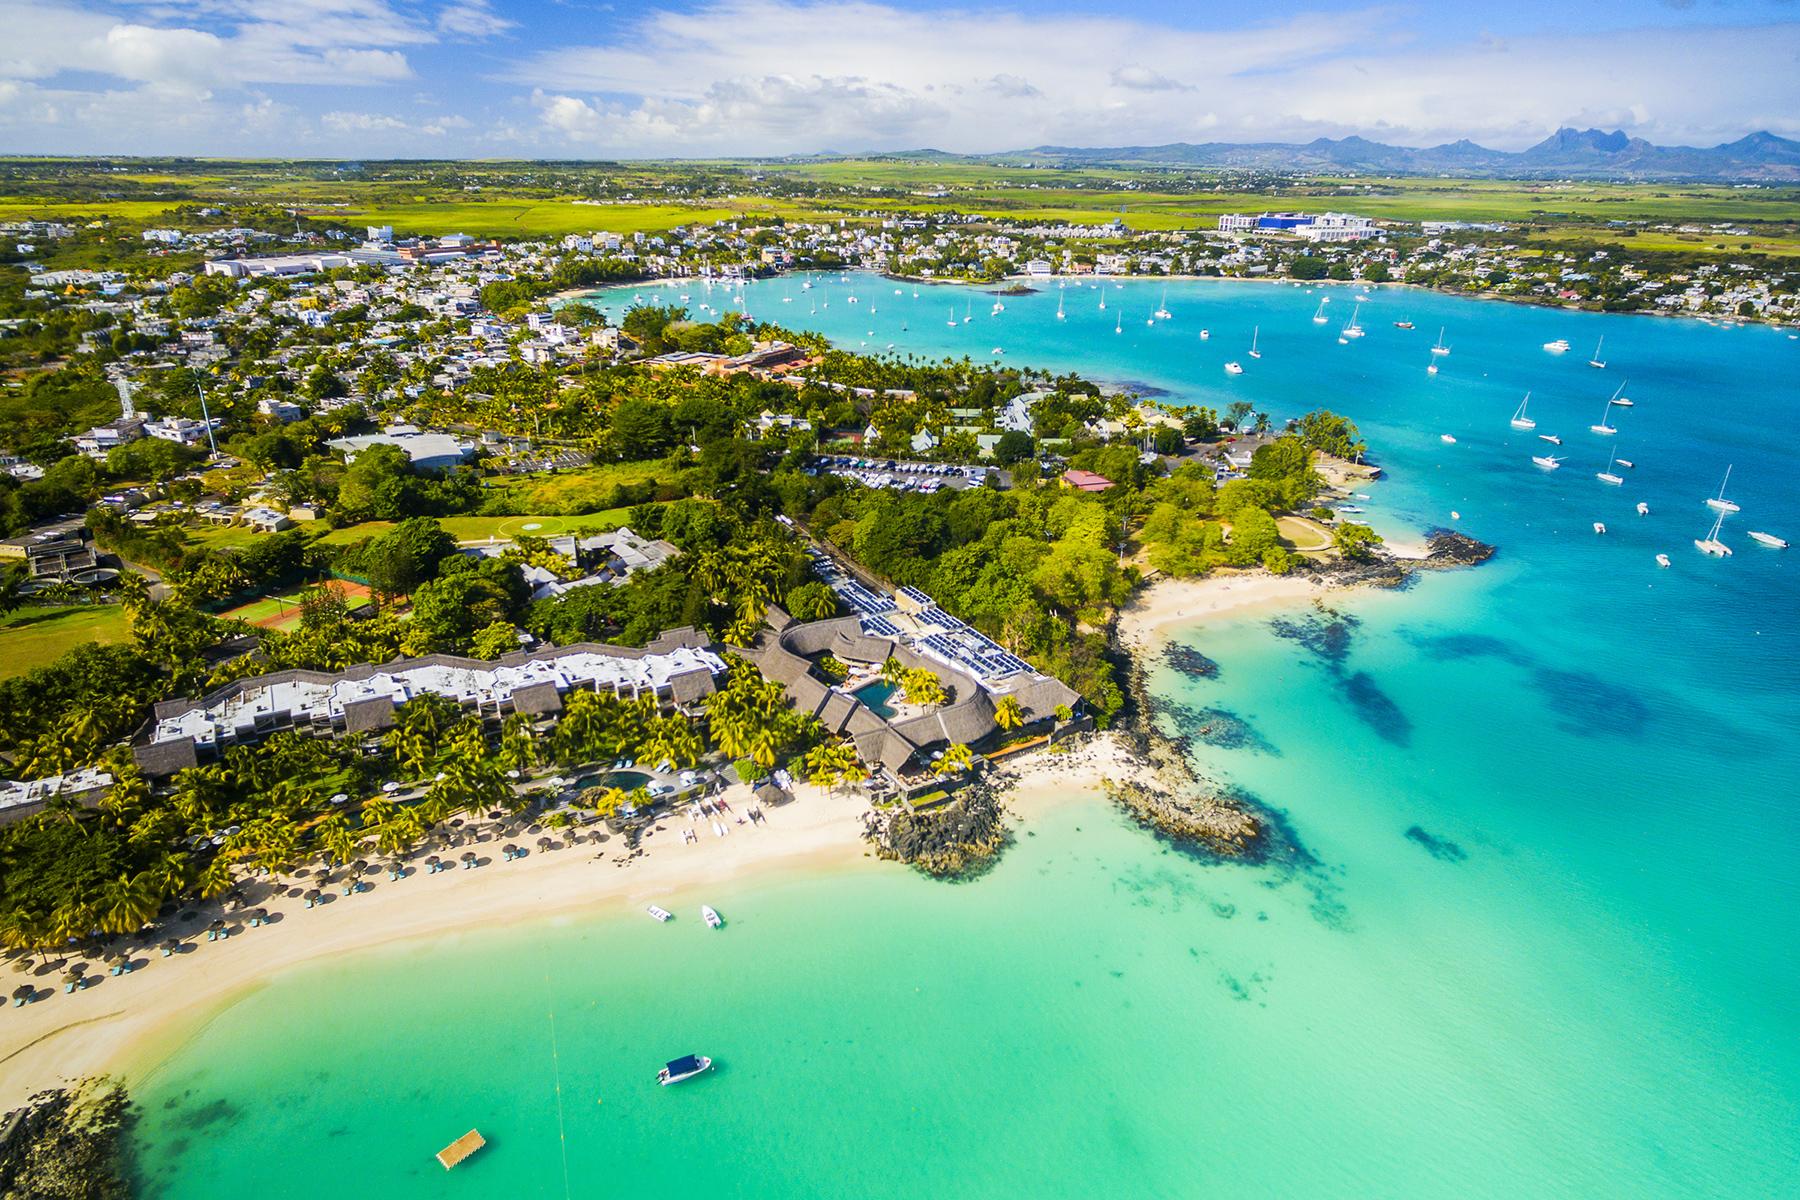 Best Things to Do in Mauritius